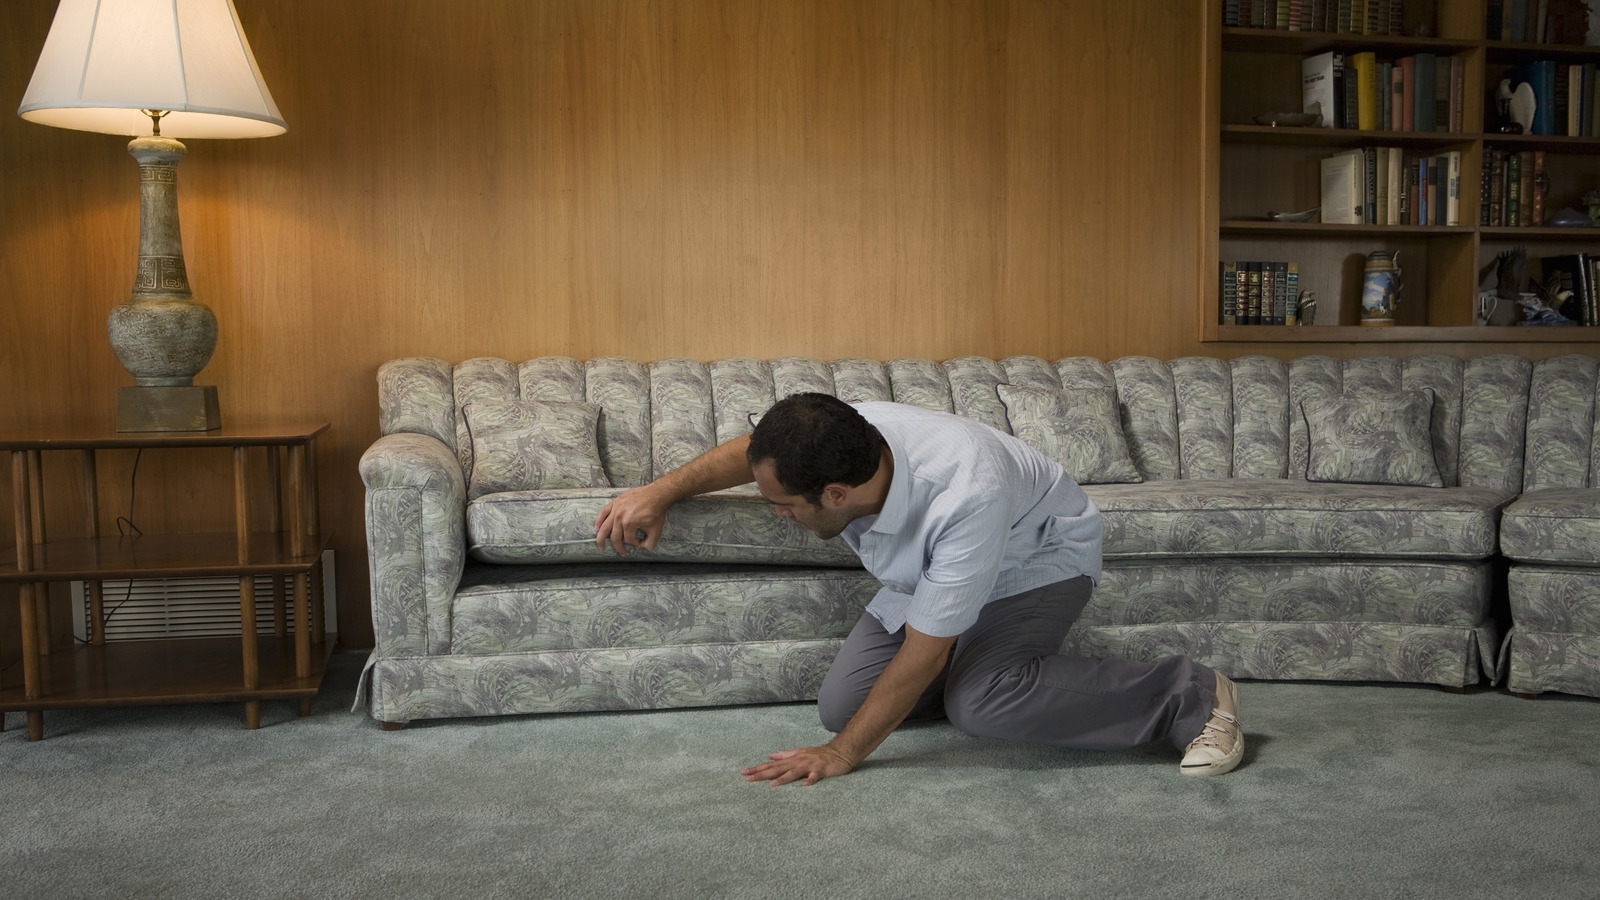 Keeping Couch Cushions From Sliding  Cushions on sofa, Couch cushions,  Couch